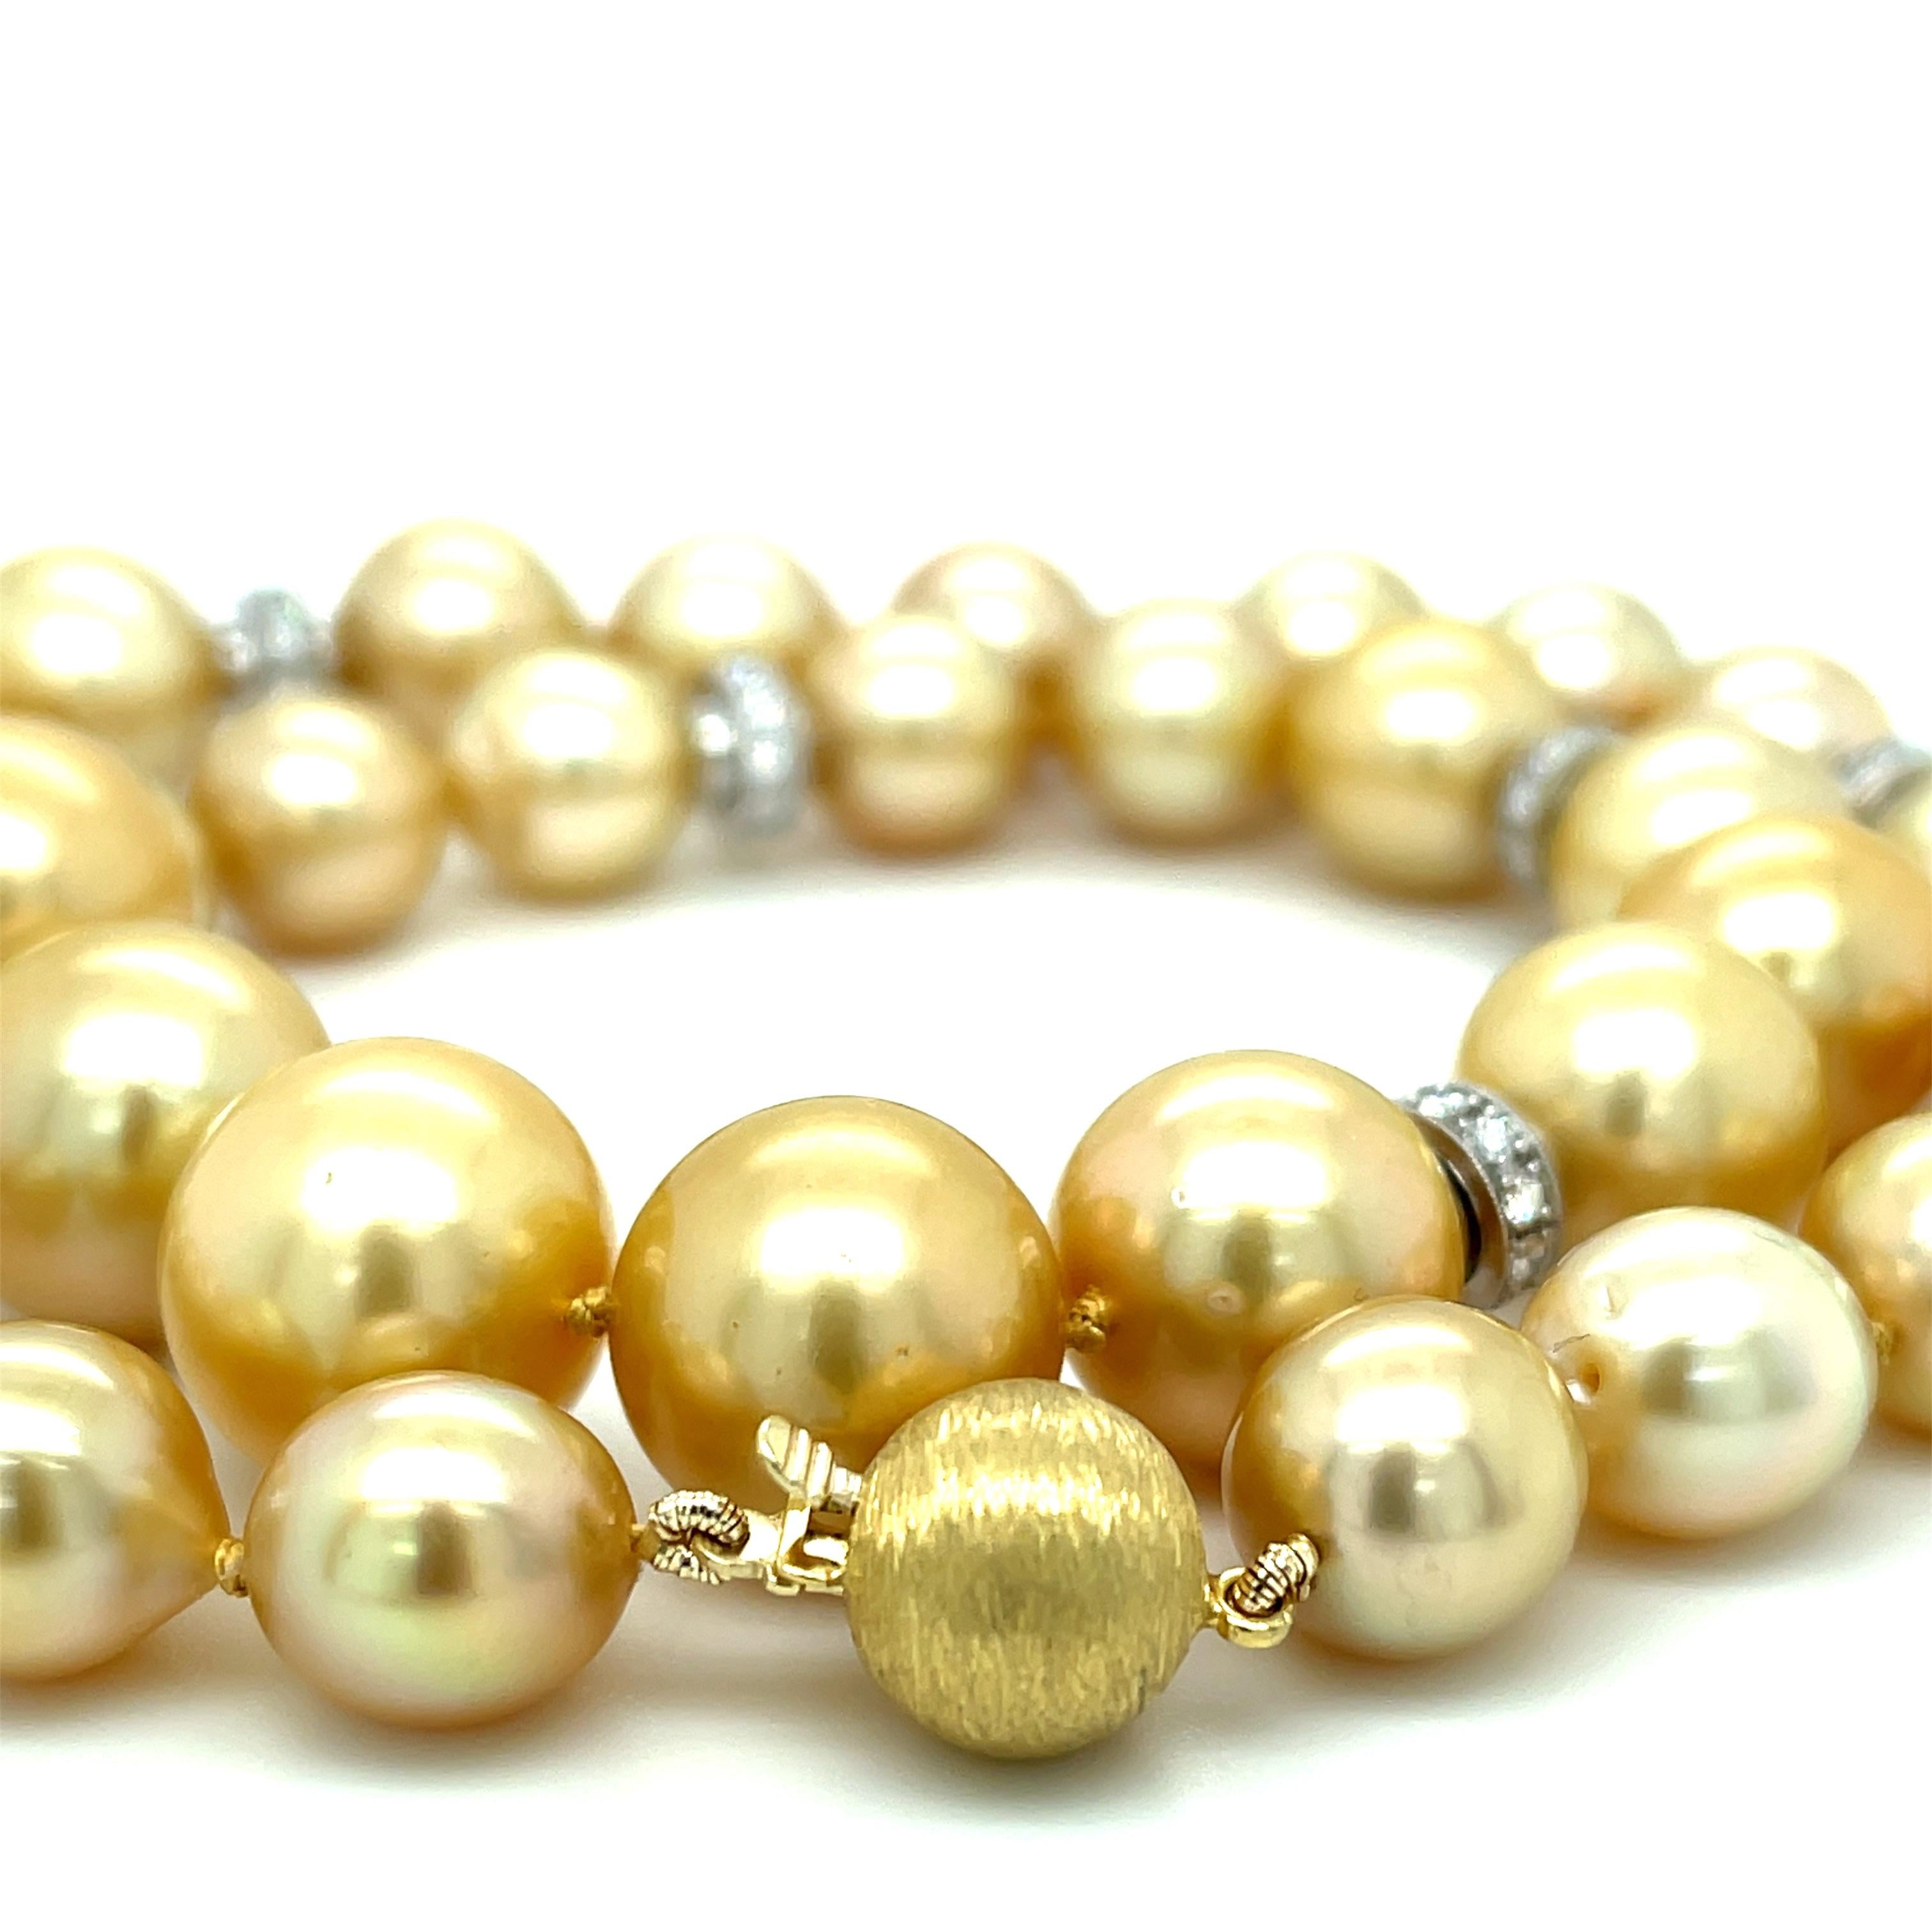 This gorgeous pearl necklace features thirty-five golden South Sea pearls, which are easily recognized and highly prized for their distinct large size, unusual colors and beautiful luster! This is a particularly beautiful collection of pearls with